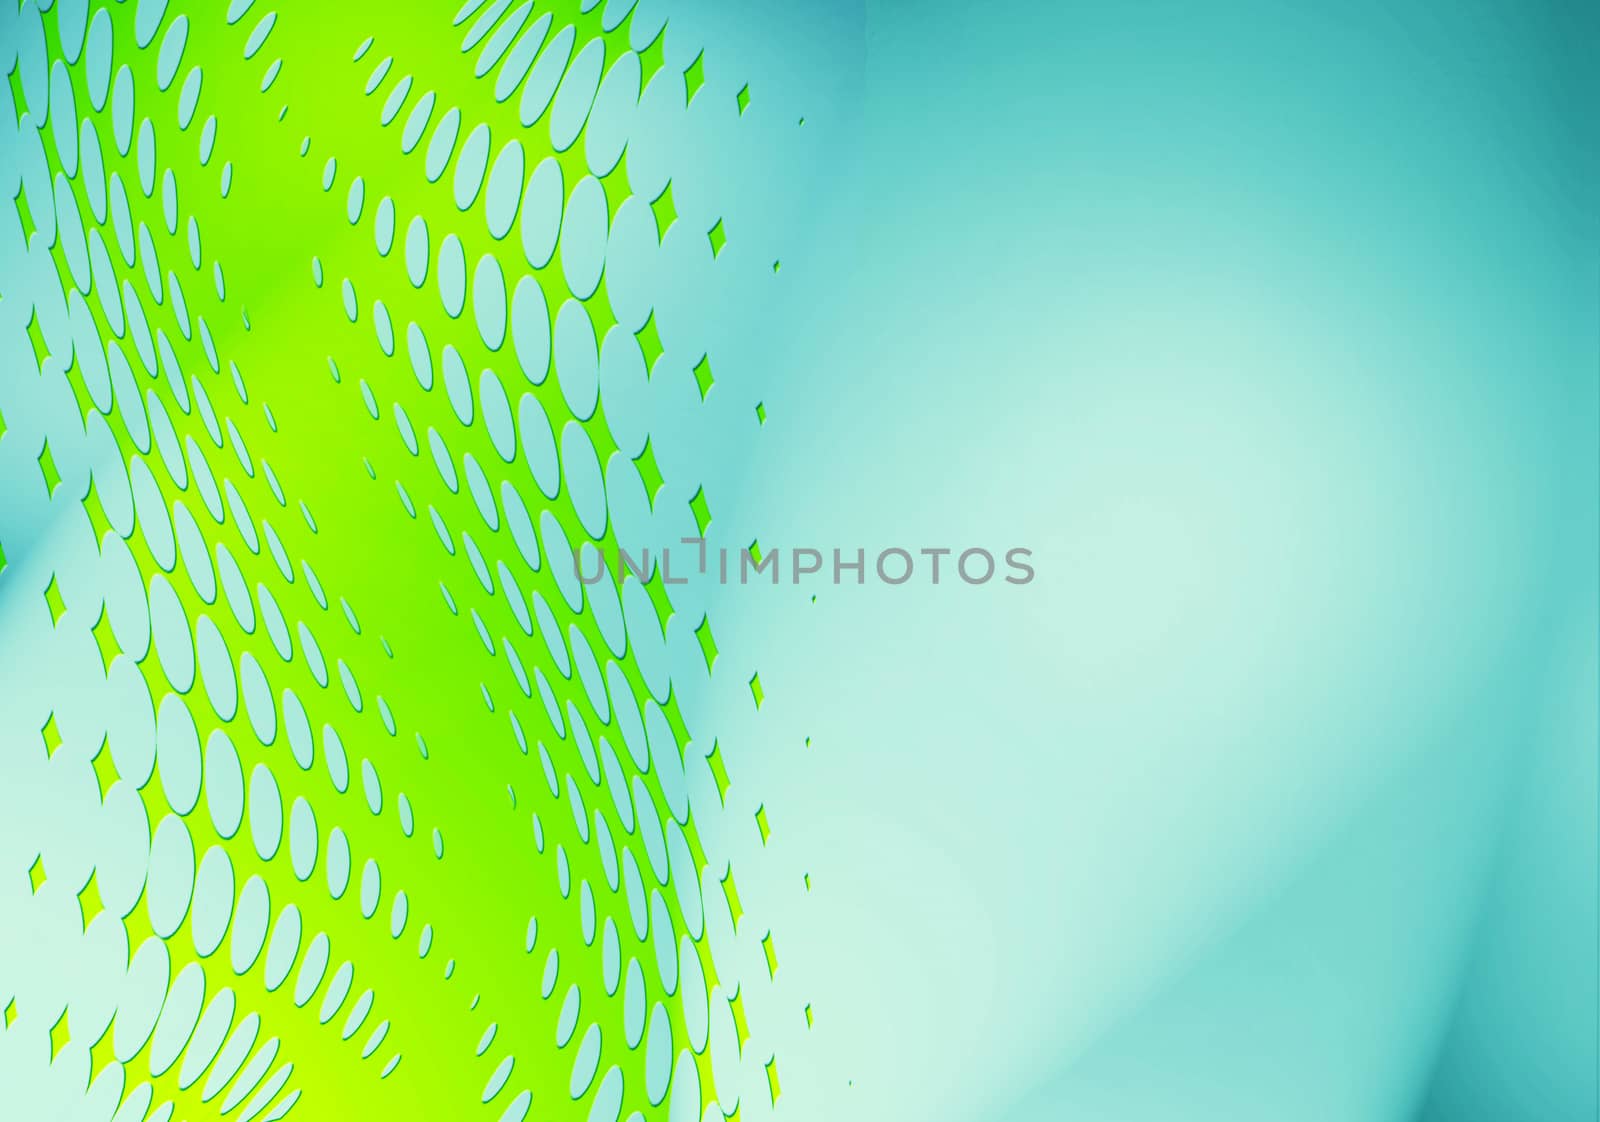 blue and green abstract background with ornamental dots